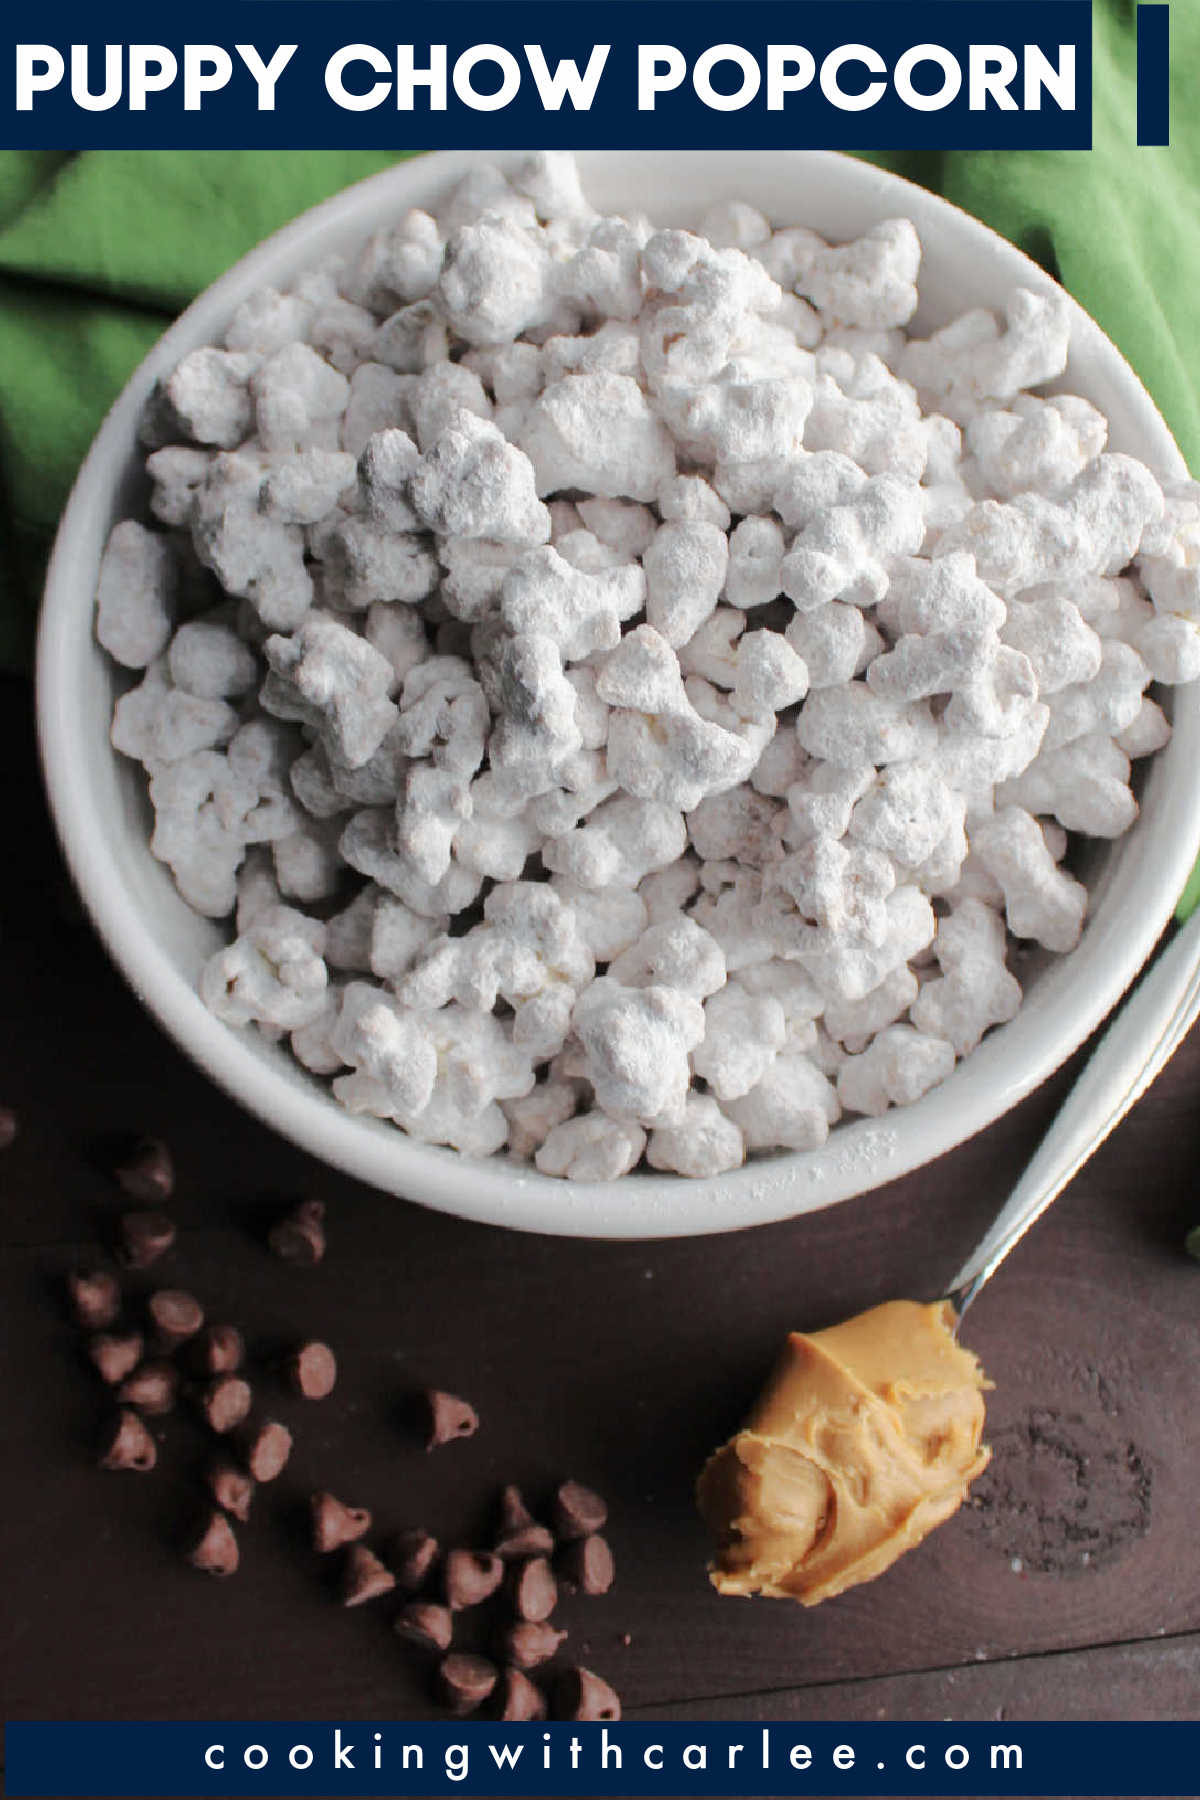 Puppy chow popcorn is the perfect combination of chocolate, peanut butter, popcorn and powdered sugar. It is a fun sweet snack mix that is perfect for movie night and parties.